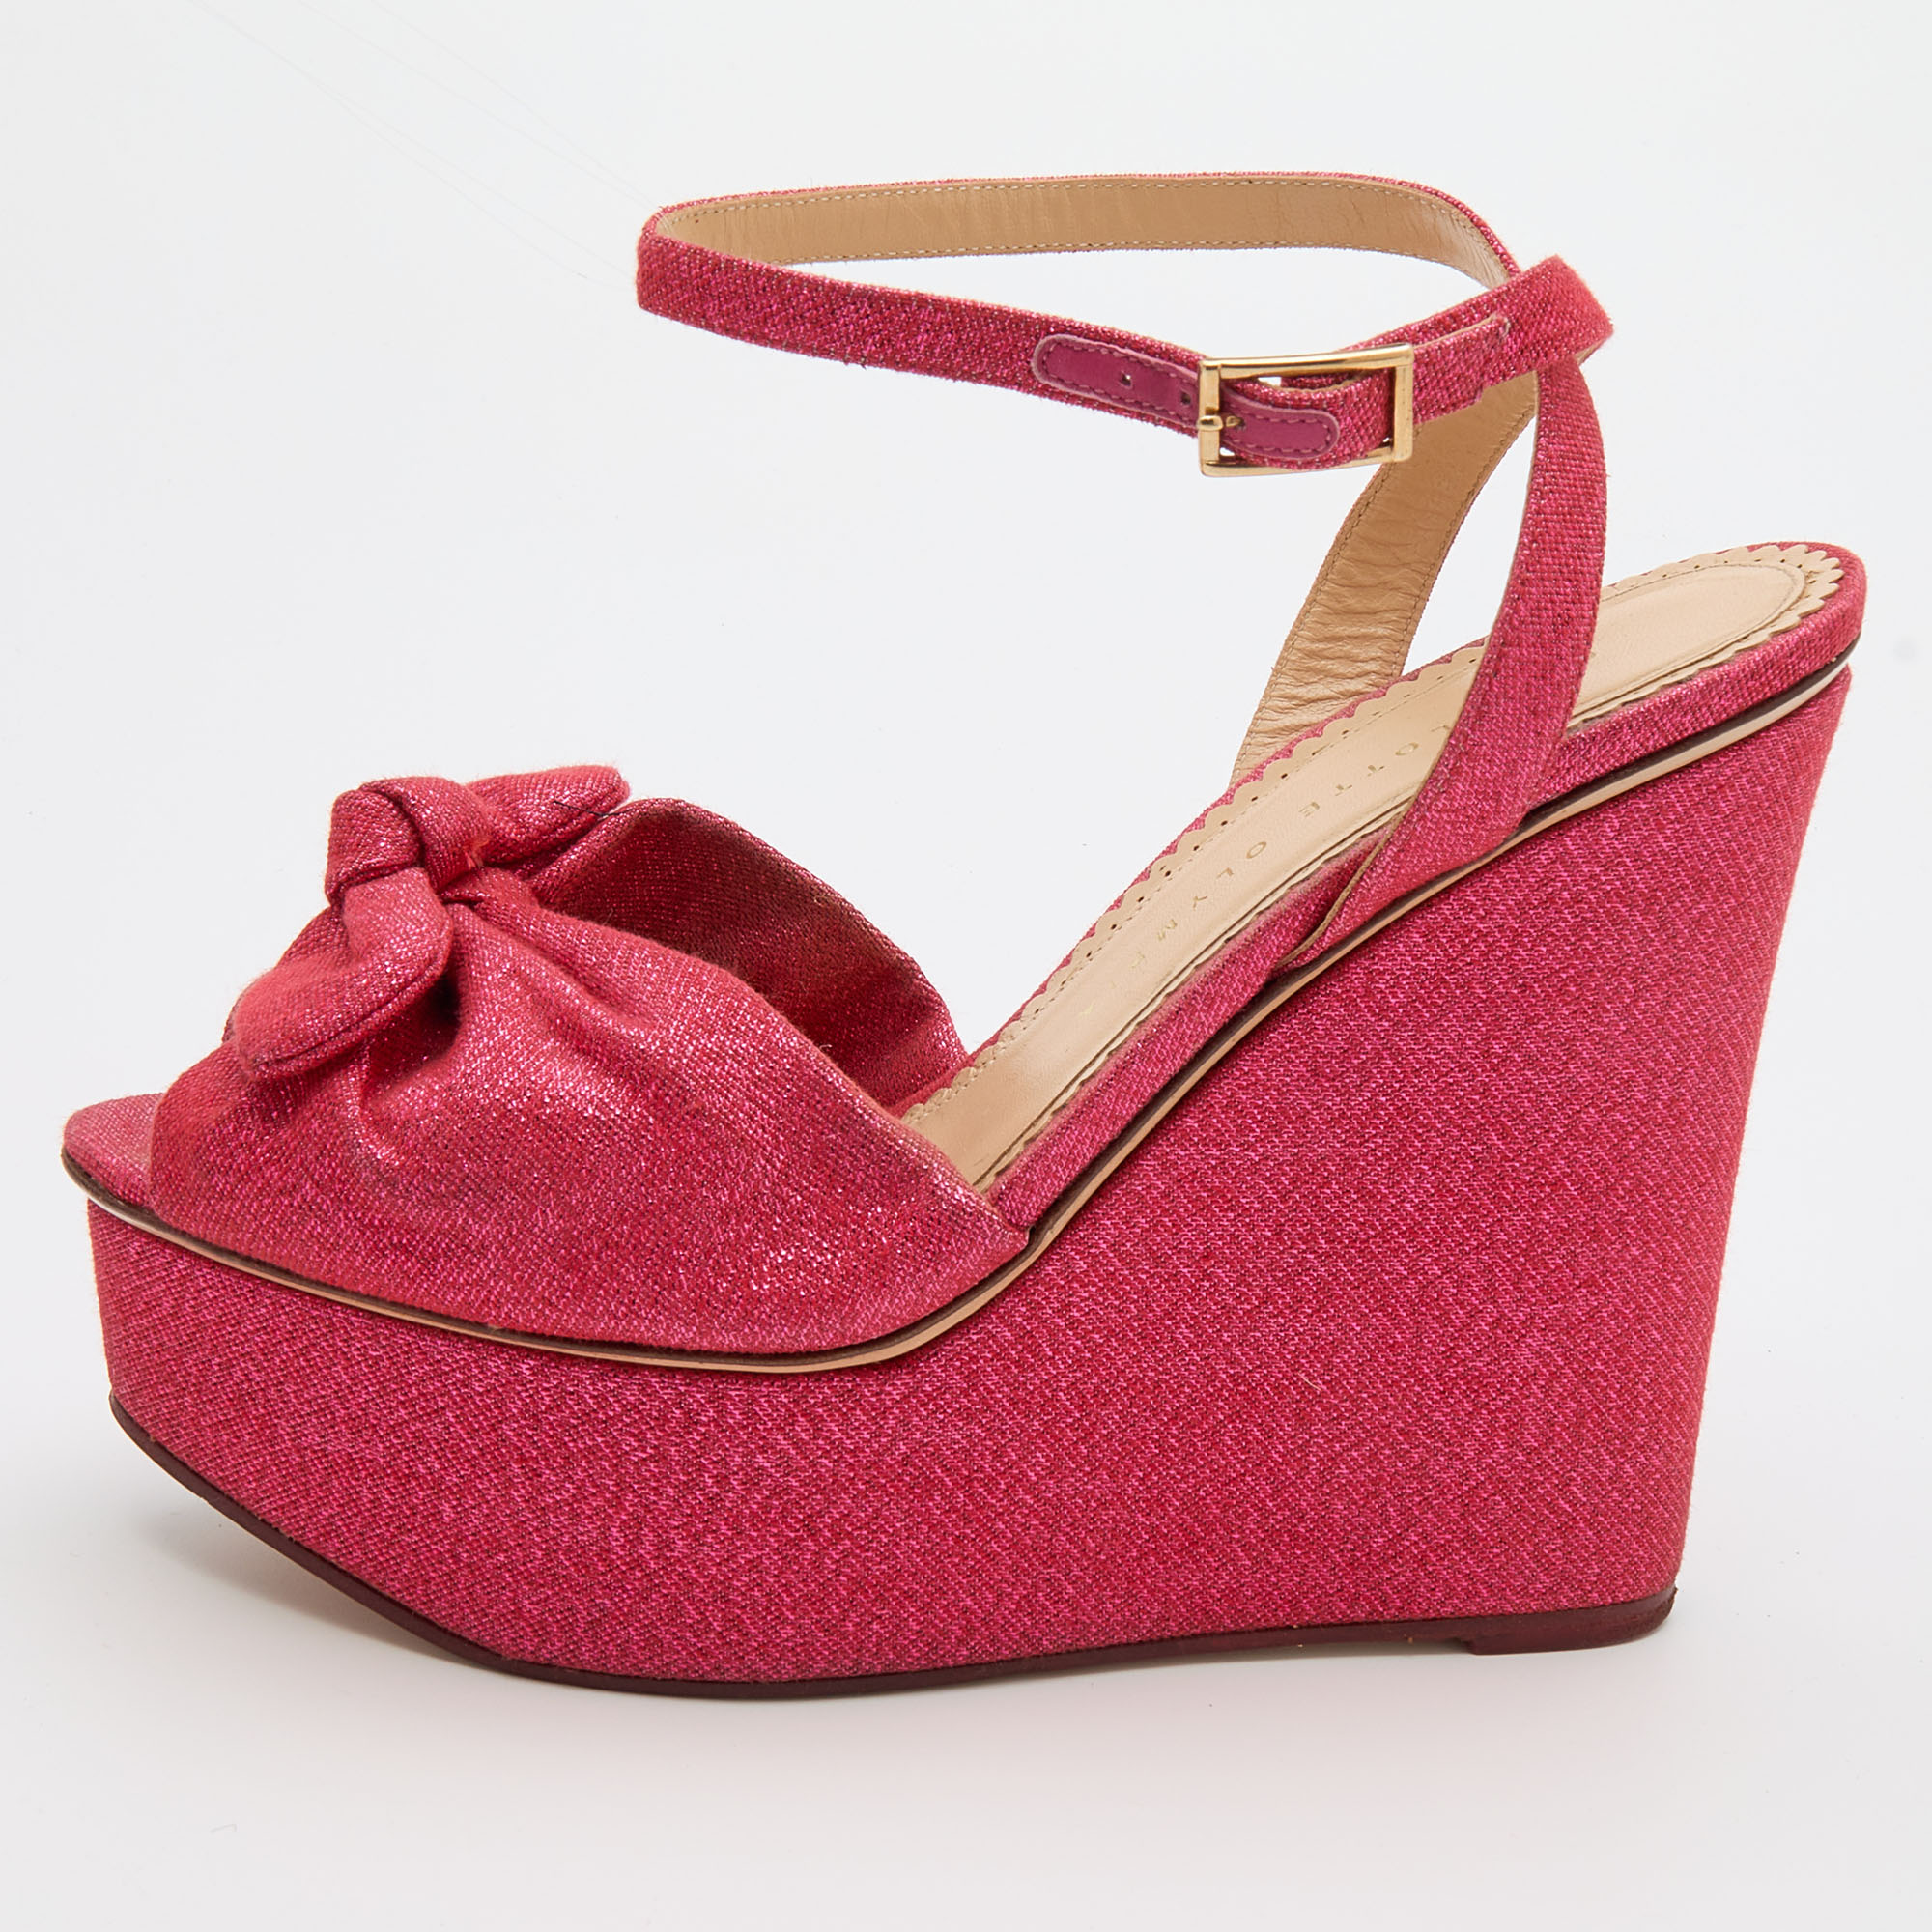 With these Charlotte Olympia sandals comfort and style are guaranteed. Crafted using glitter fabric they feature a pink hue and rest on durable soles.